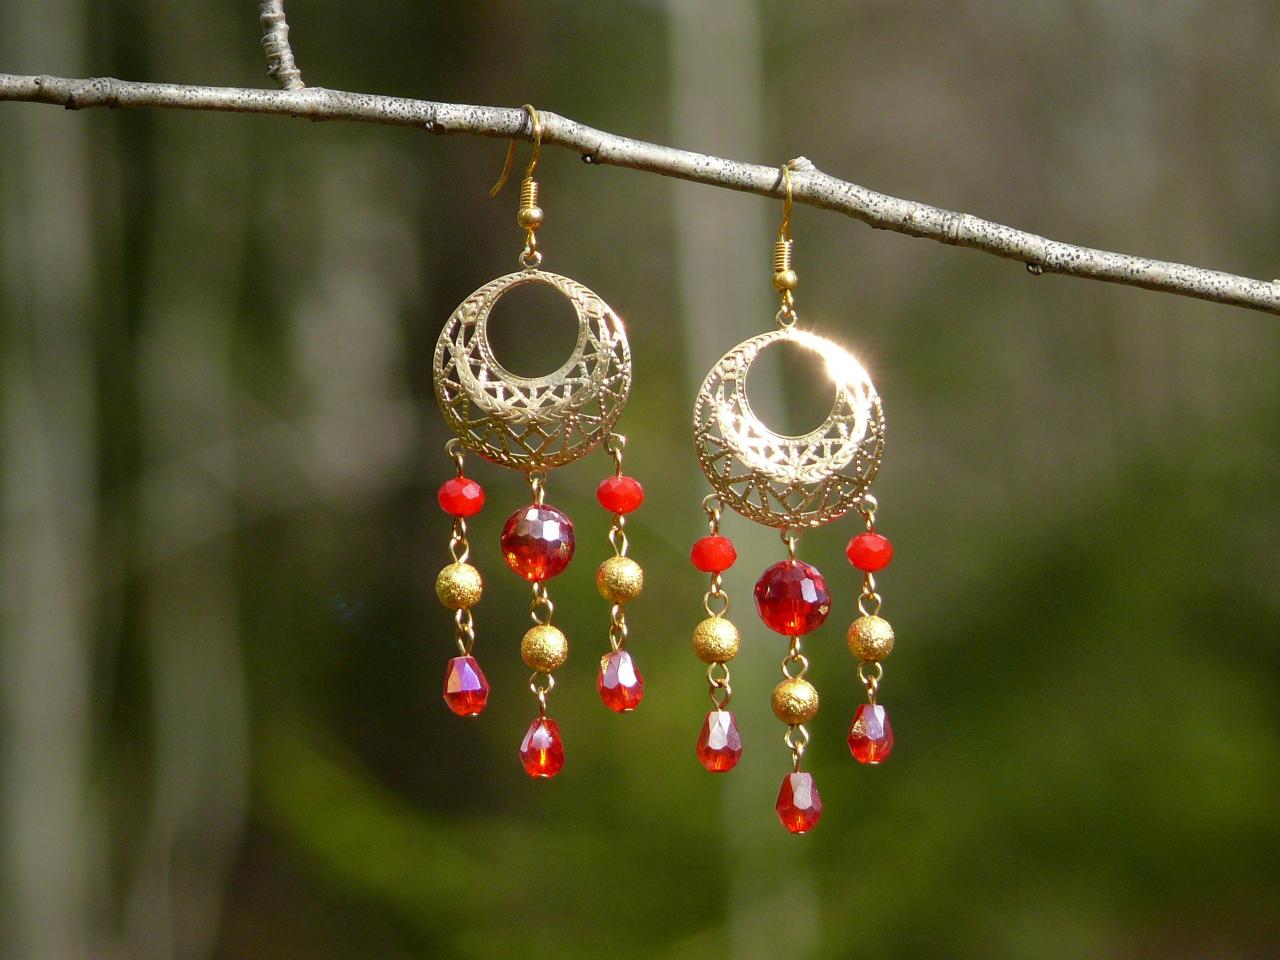 Long Cluster Red Earrings With Glass Beads, Gold And Red Chandelier Earrings, Red Fringe Dangles, Red Boho Earrings